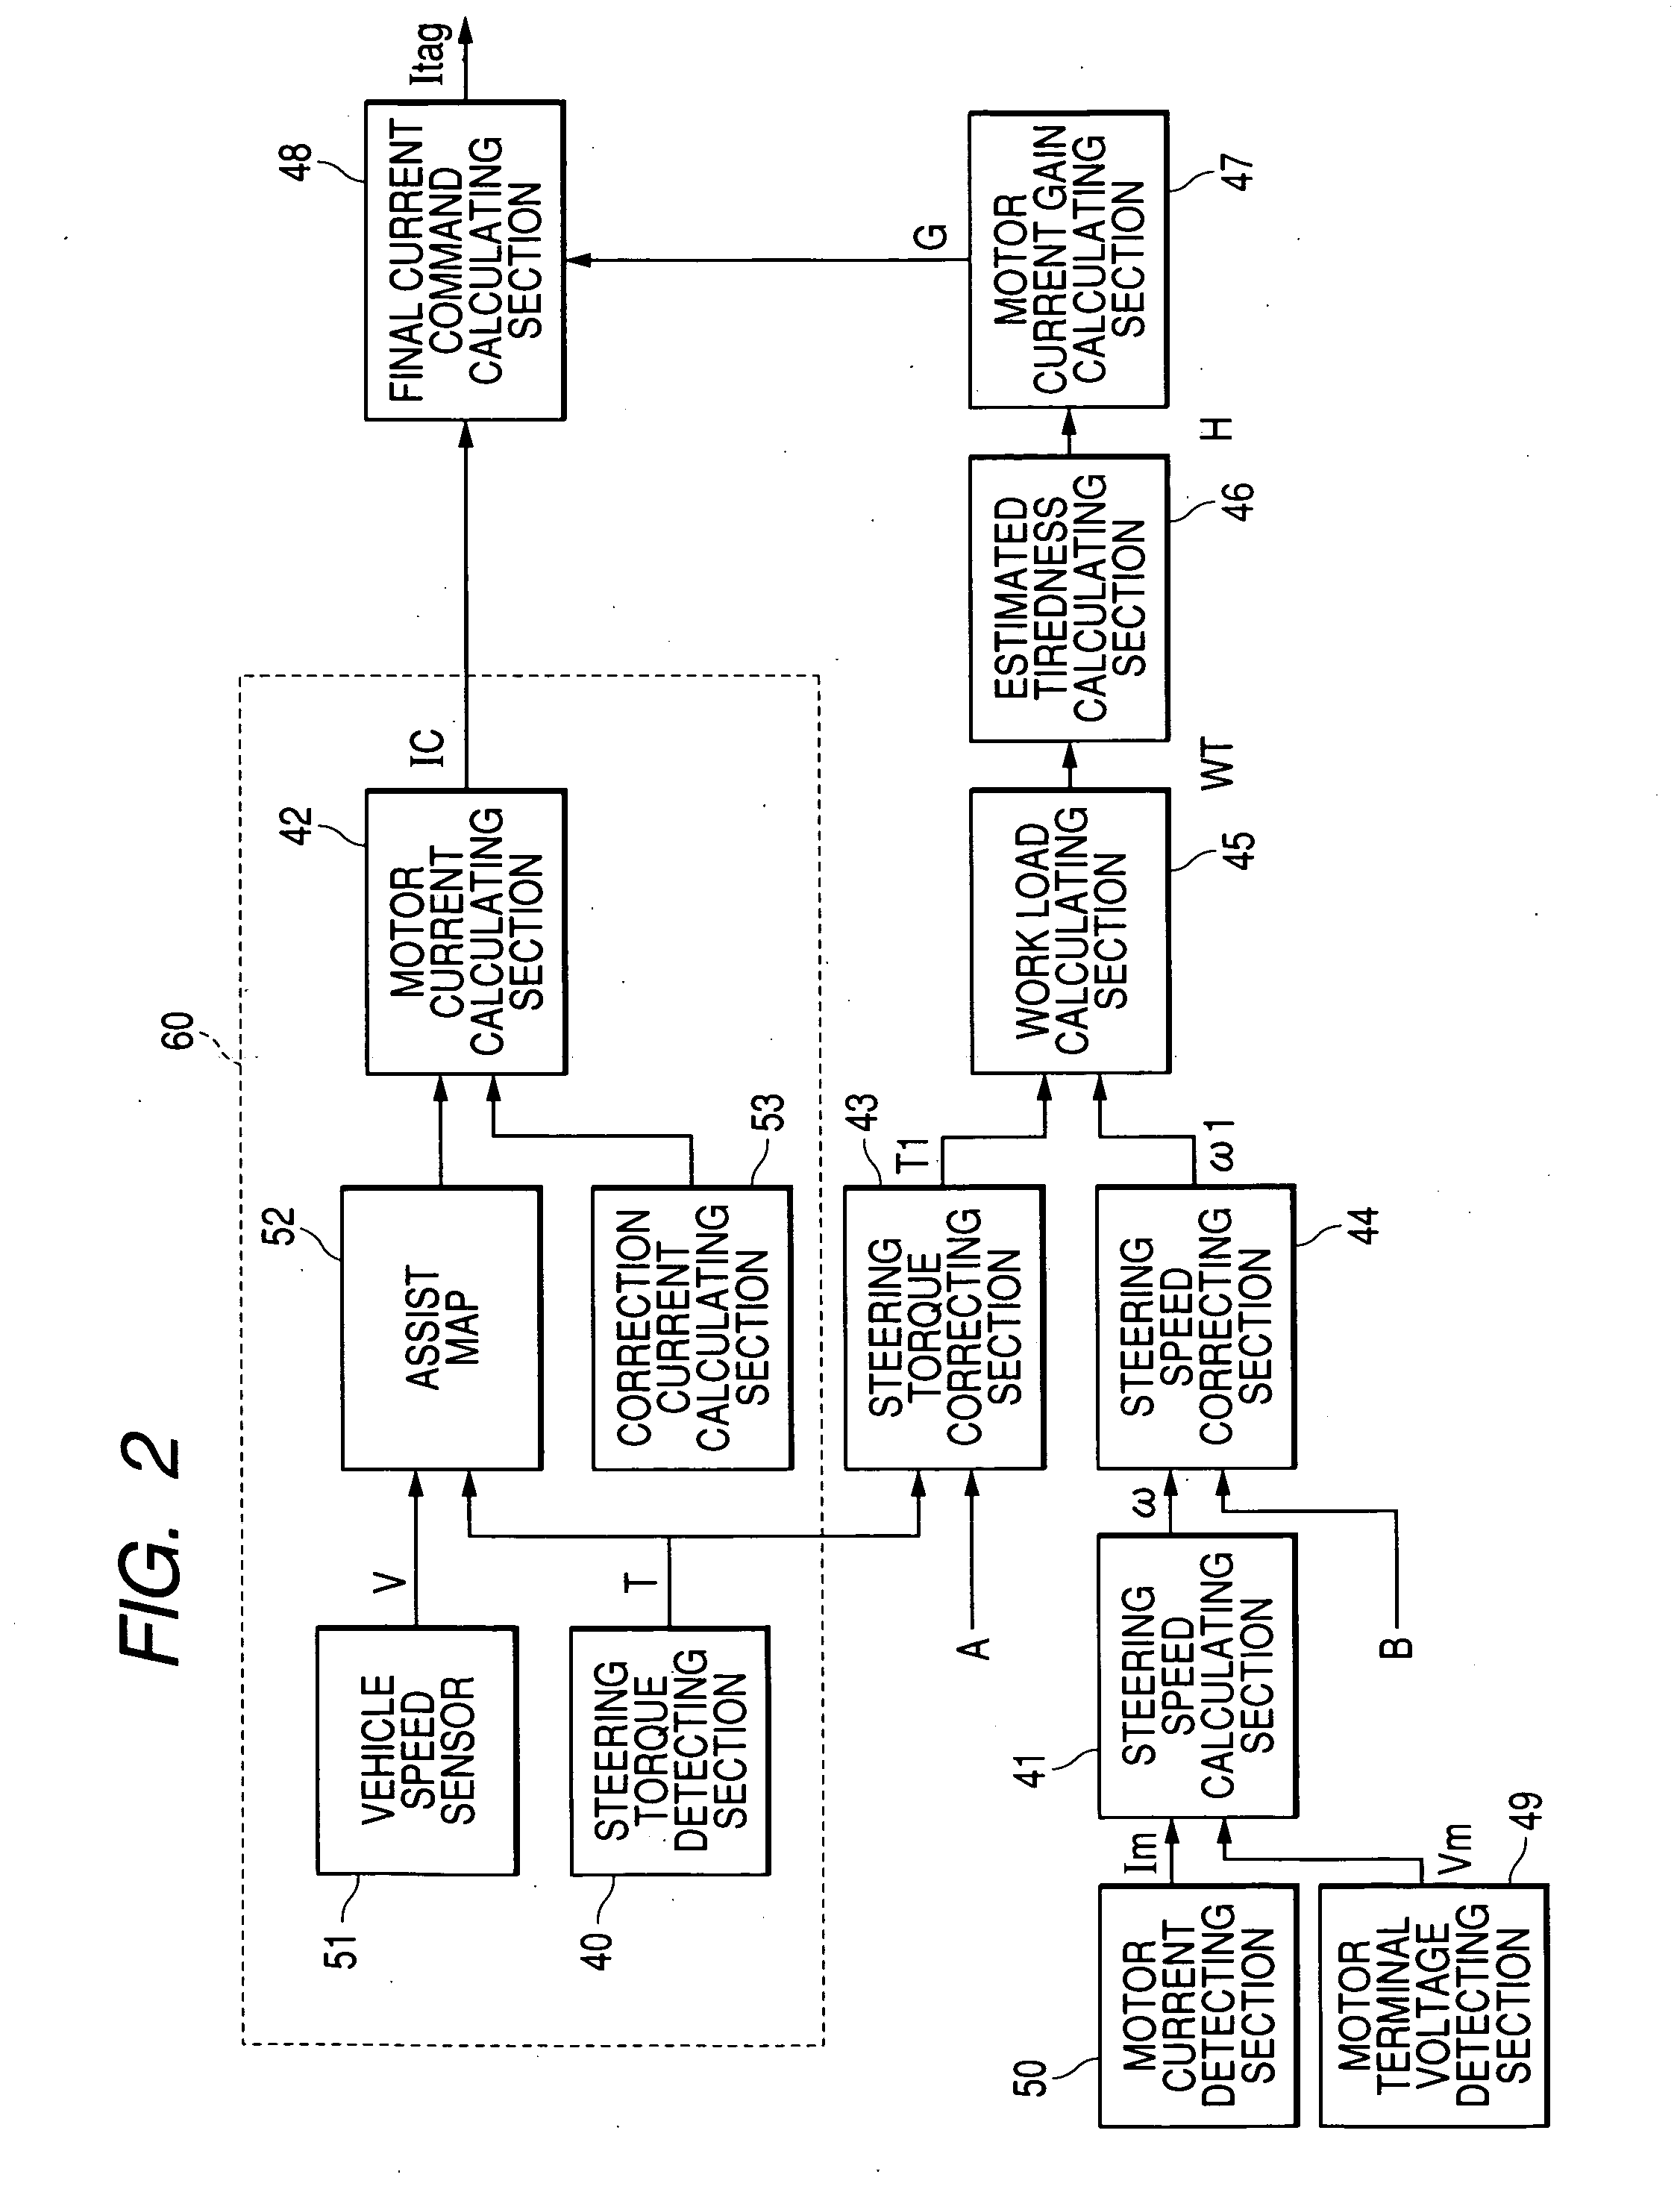 Control apparatus for an electrically driven power steering